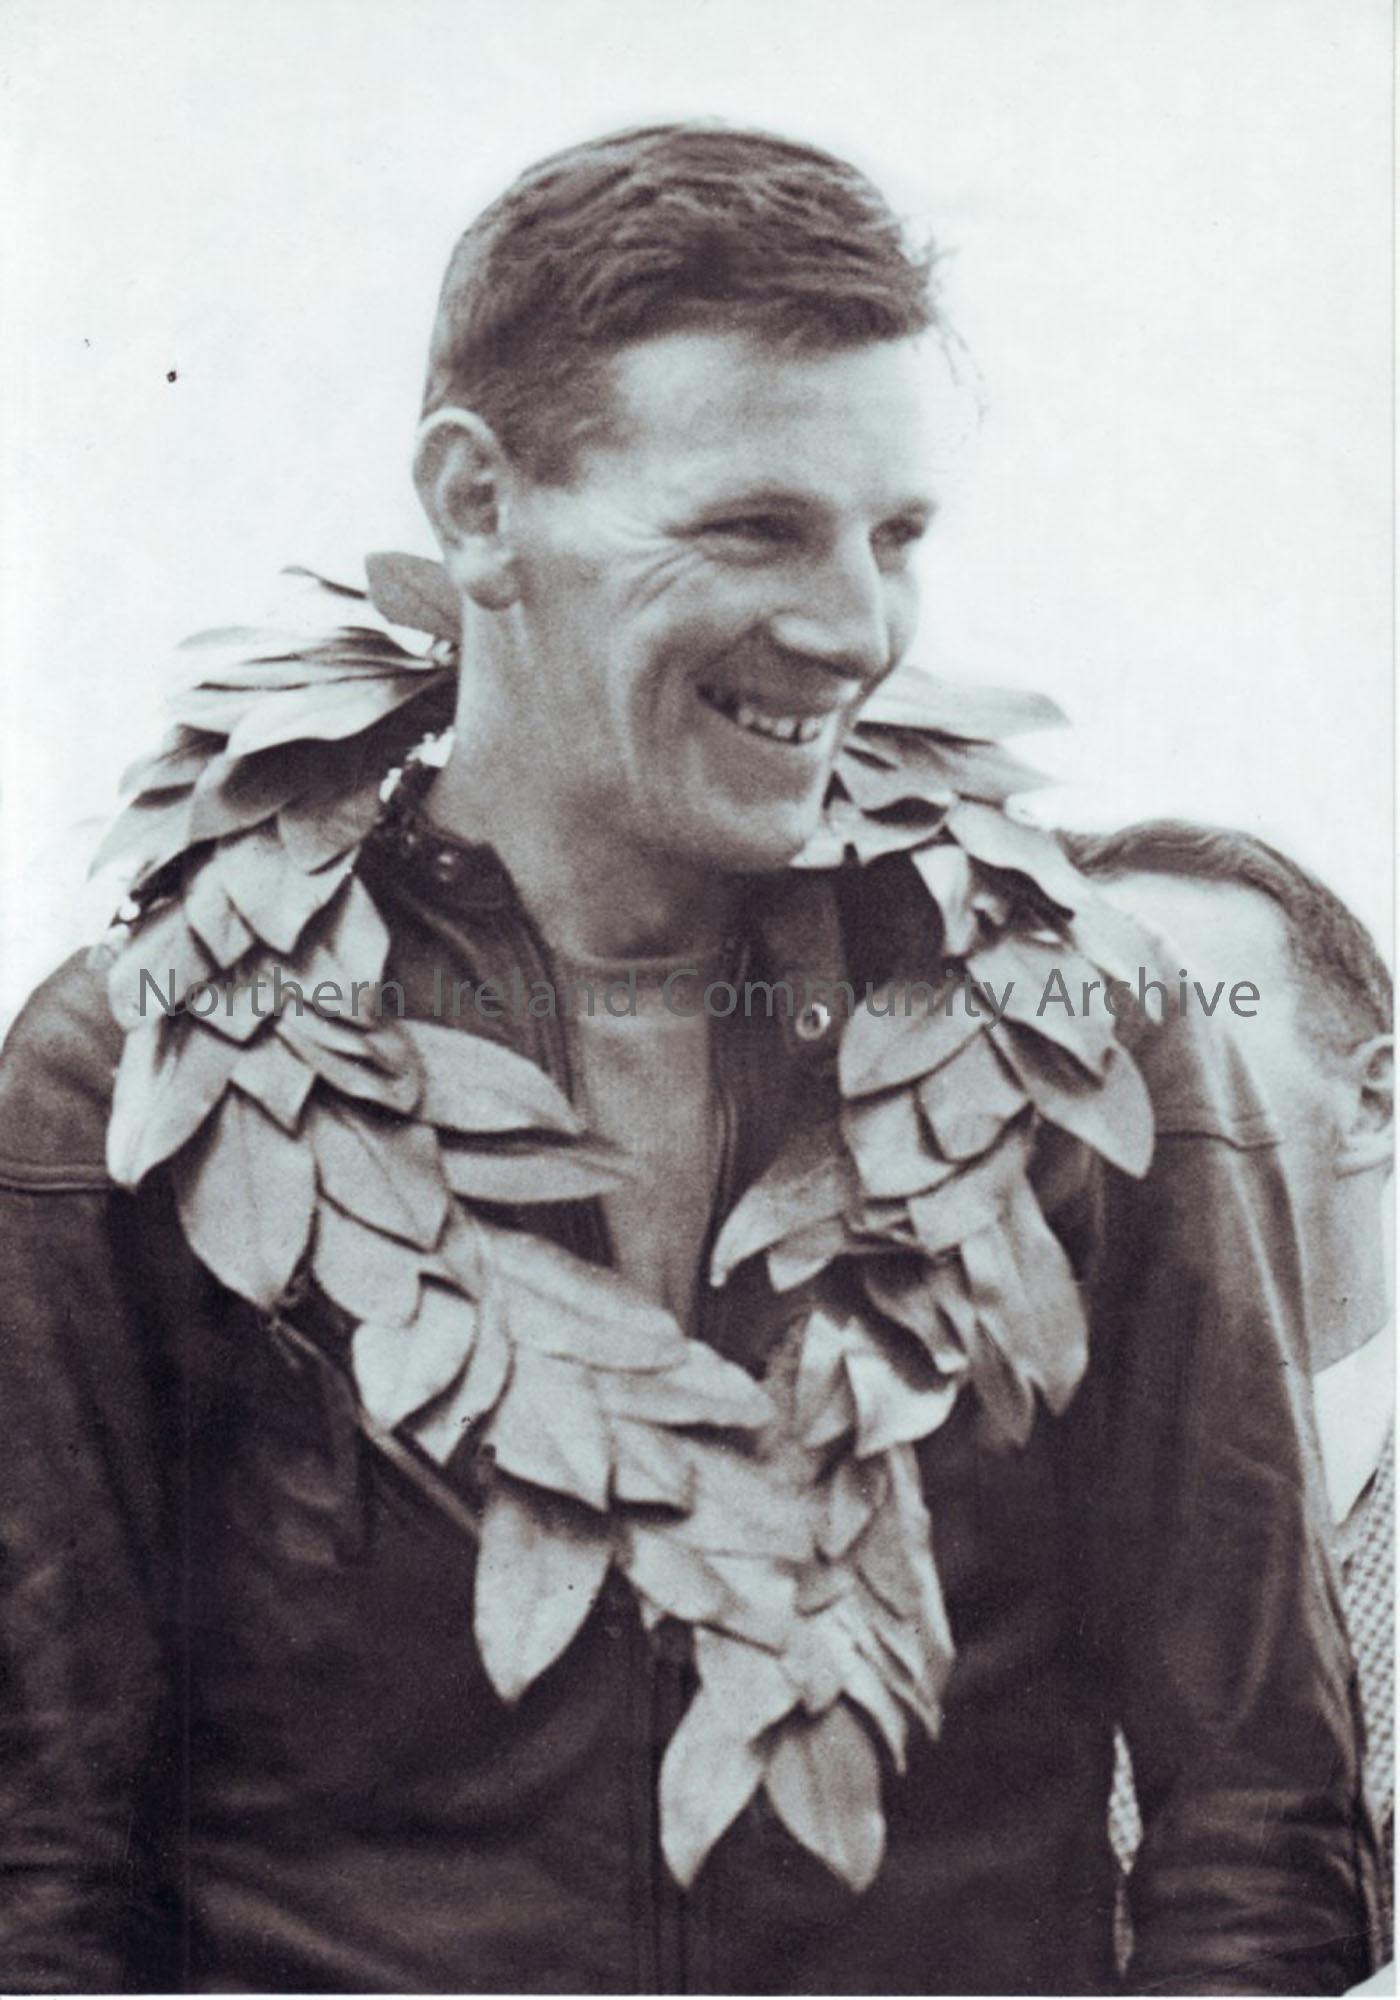 black and white photograph of Richard Creith with wreath around his neck